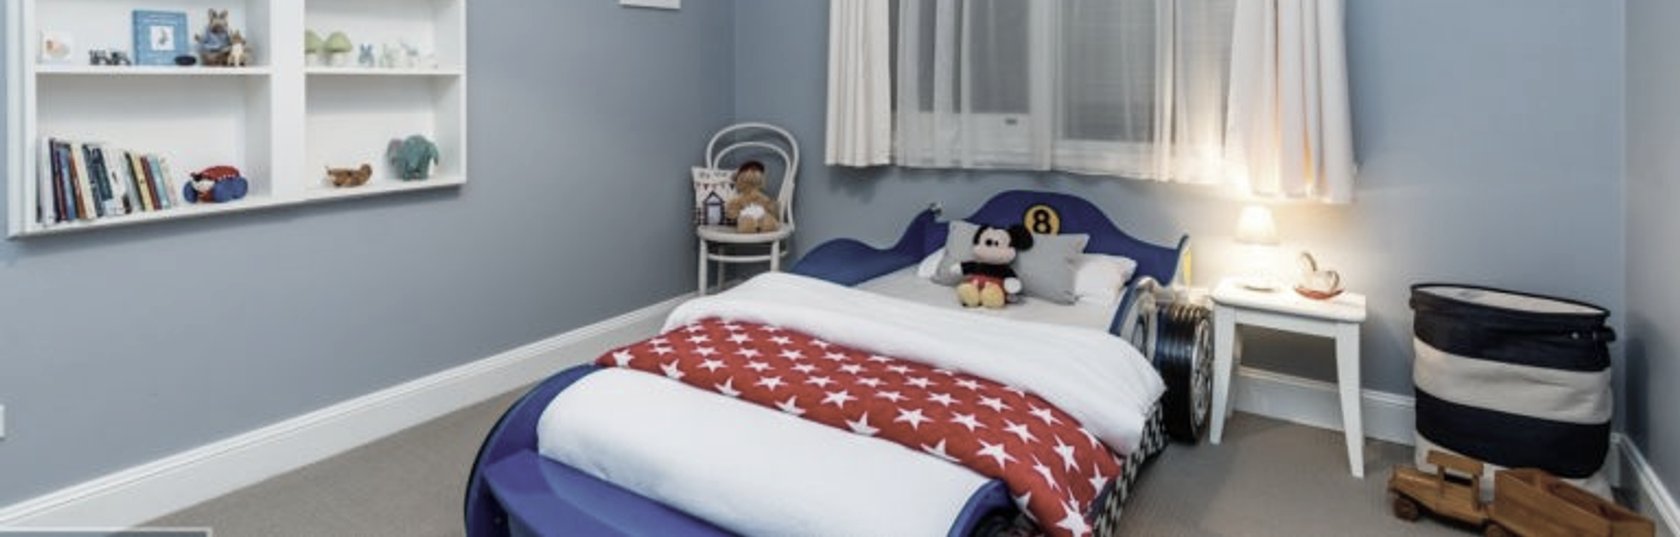 Decorating Children’s Bedrooms to Grow with Them